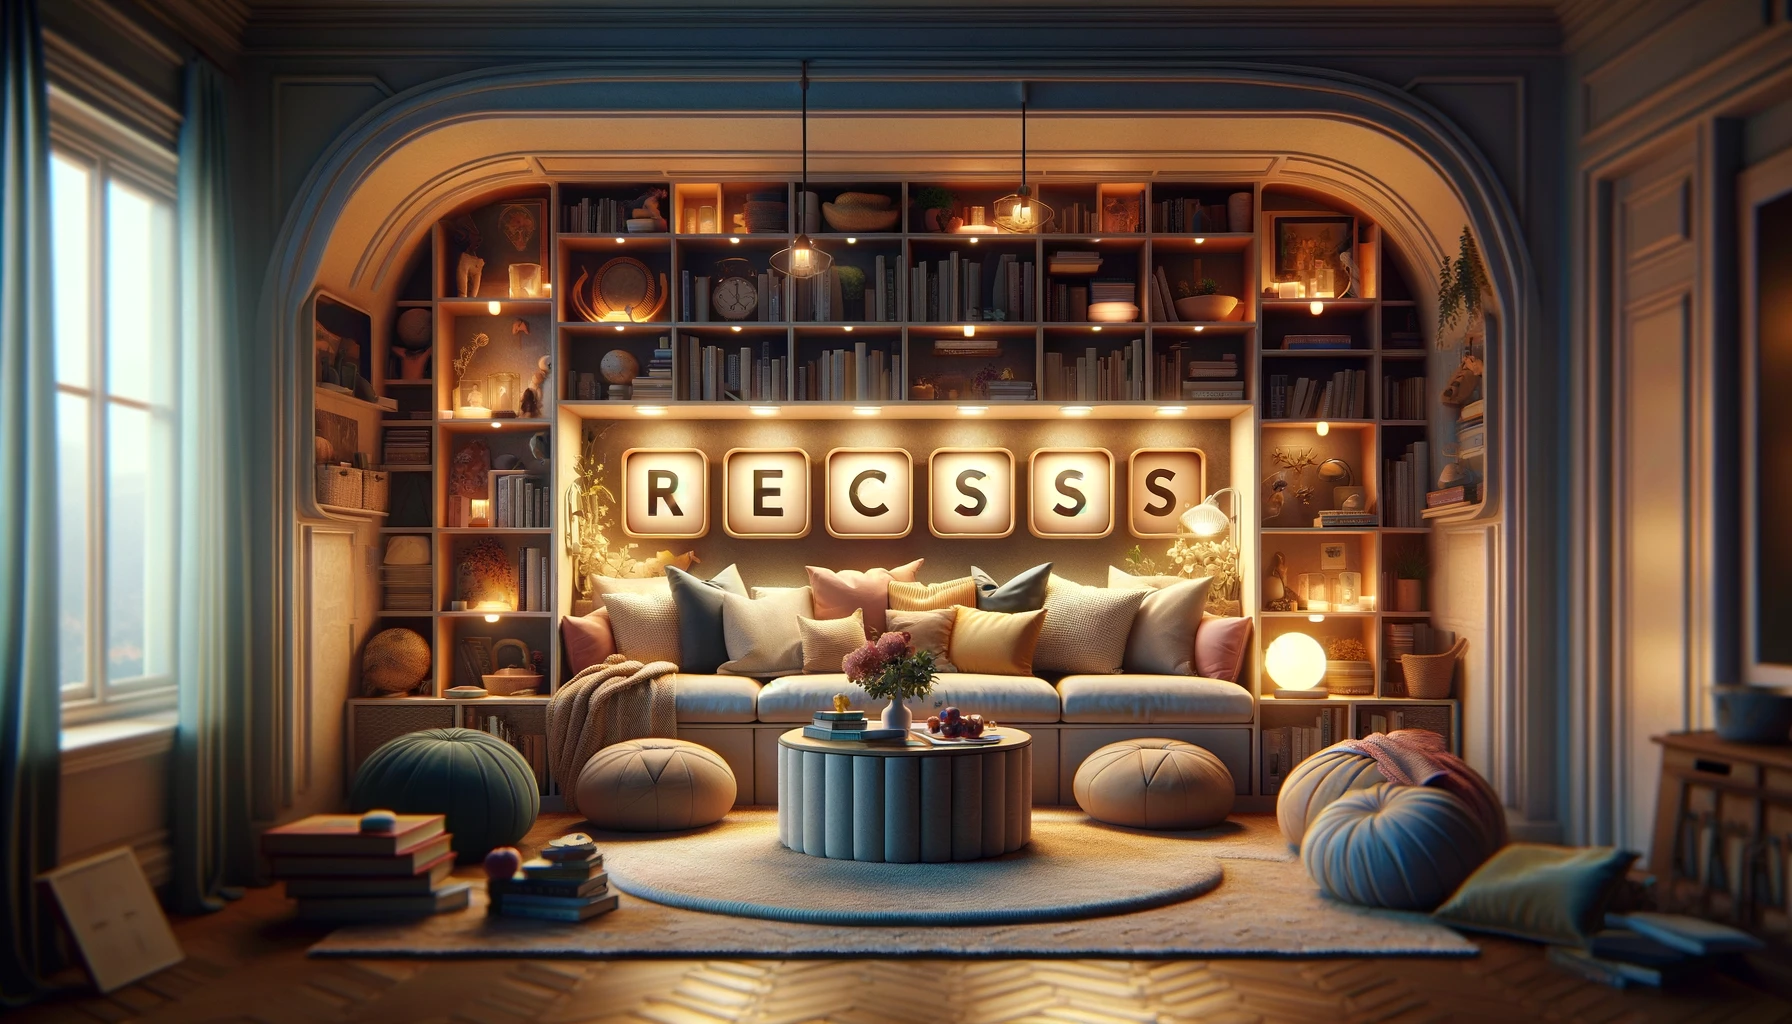 Room recess 7 Little Words Answer